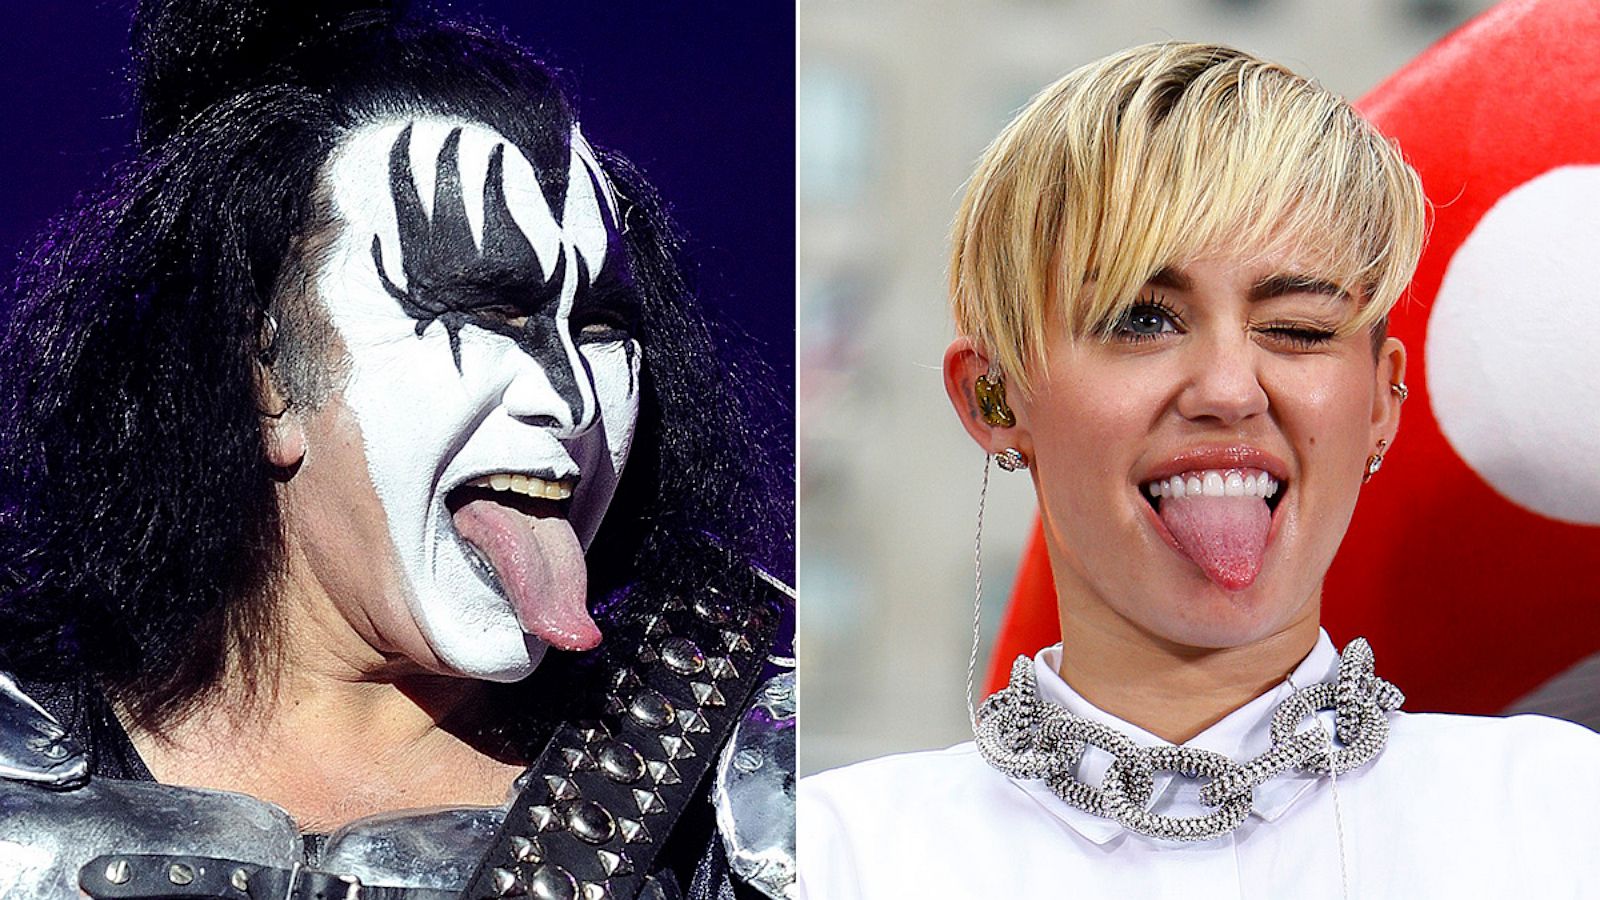 Tale of the Tape Gene Simmons and Miley Cyrus pic